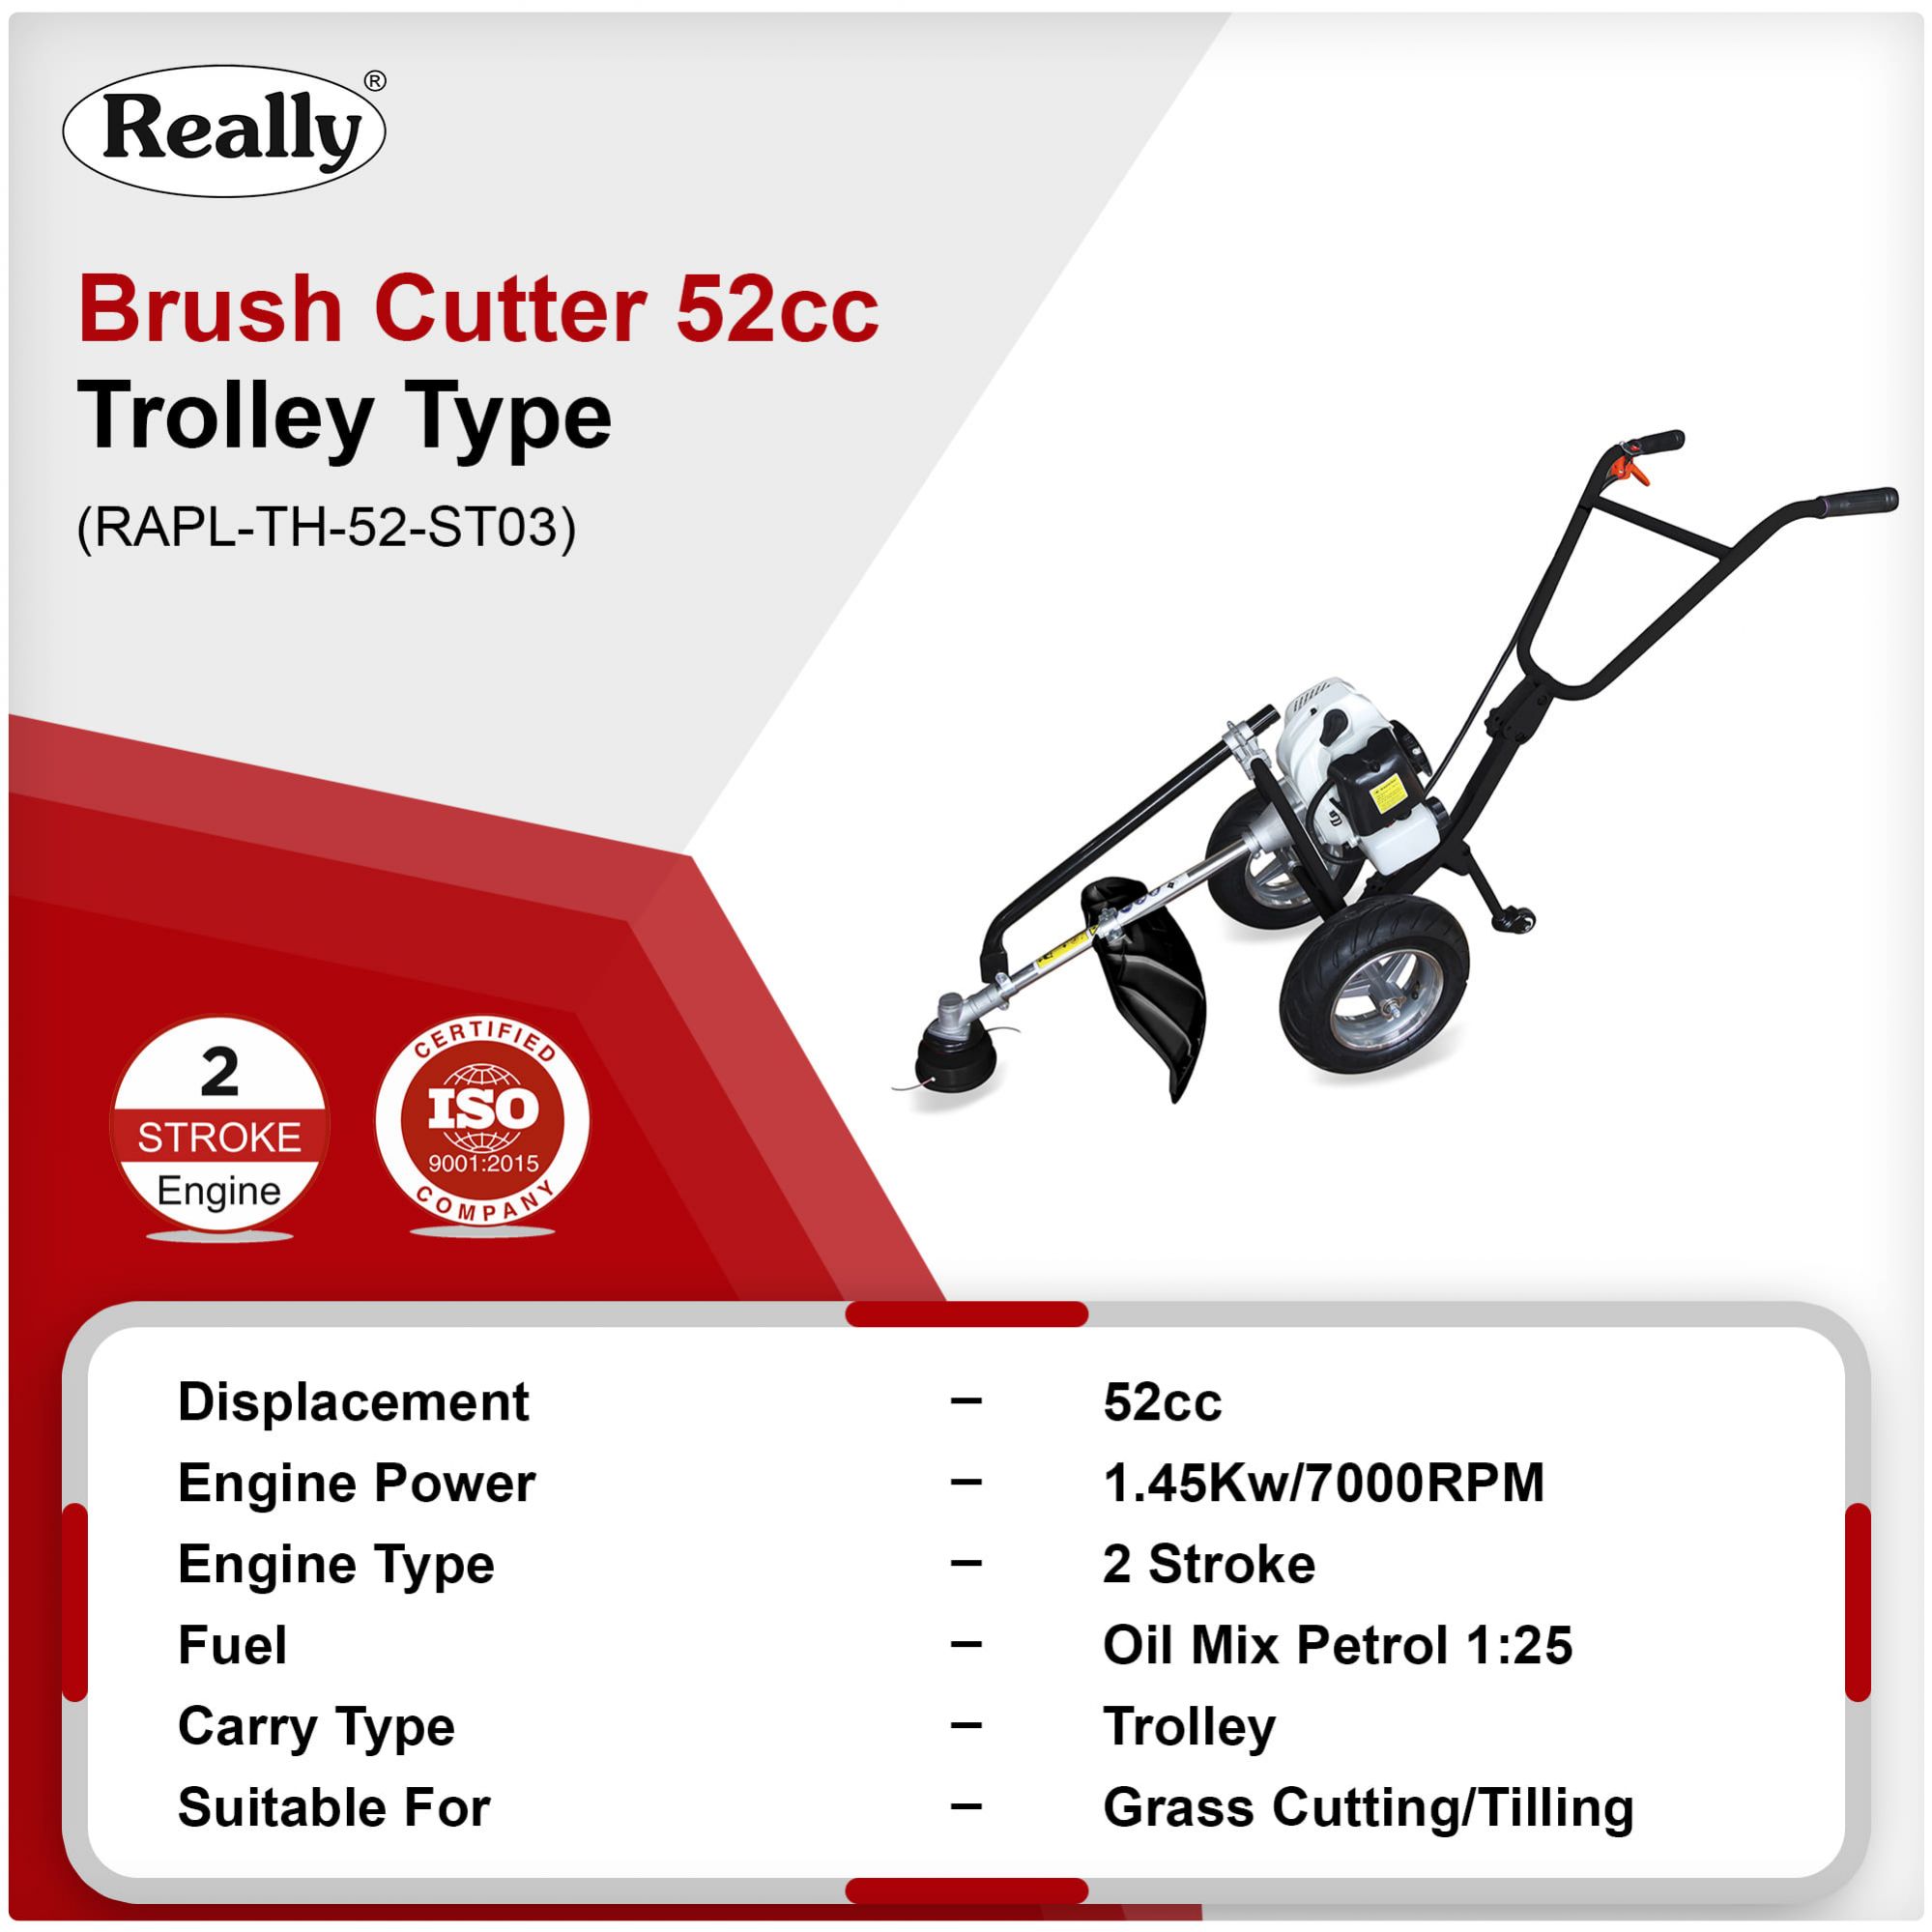 Really Agricultural Trolley Brush Cutter (RAPL-TH-52-ST03)